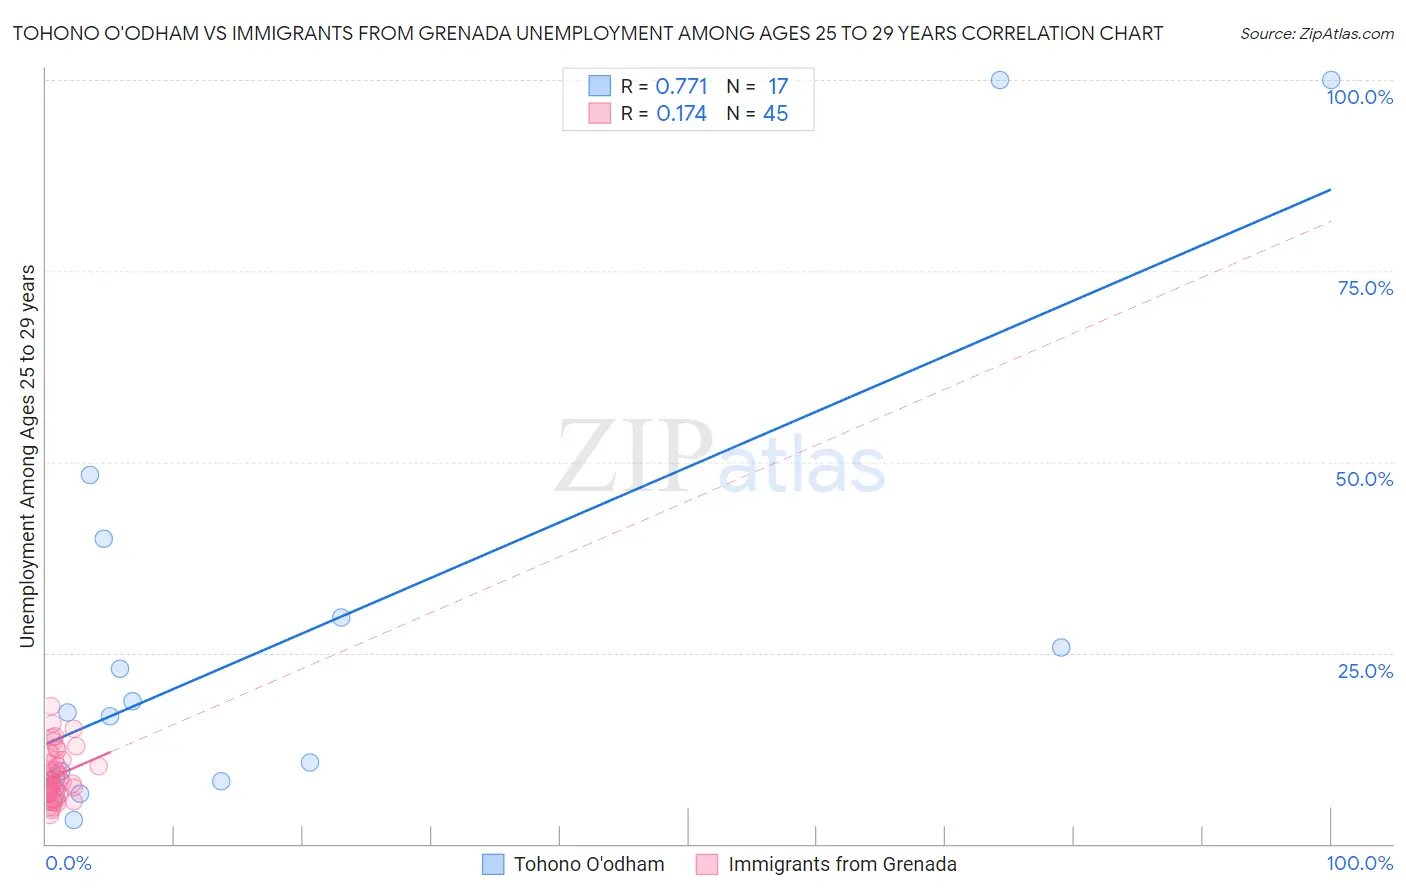 Tohono O'odham vs Immigrants from Grenada Unemployment Among Ages 25 to 29 years